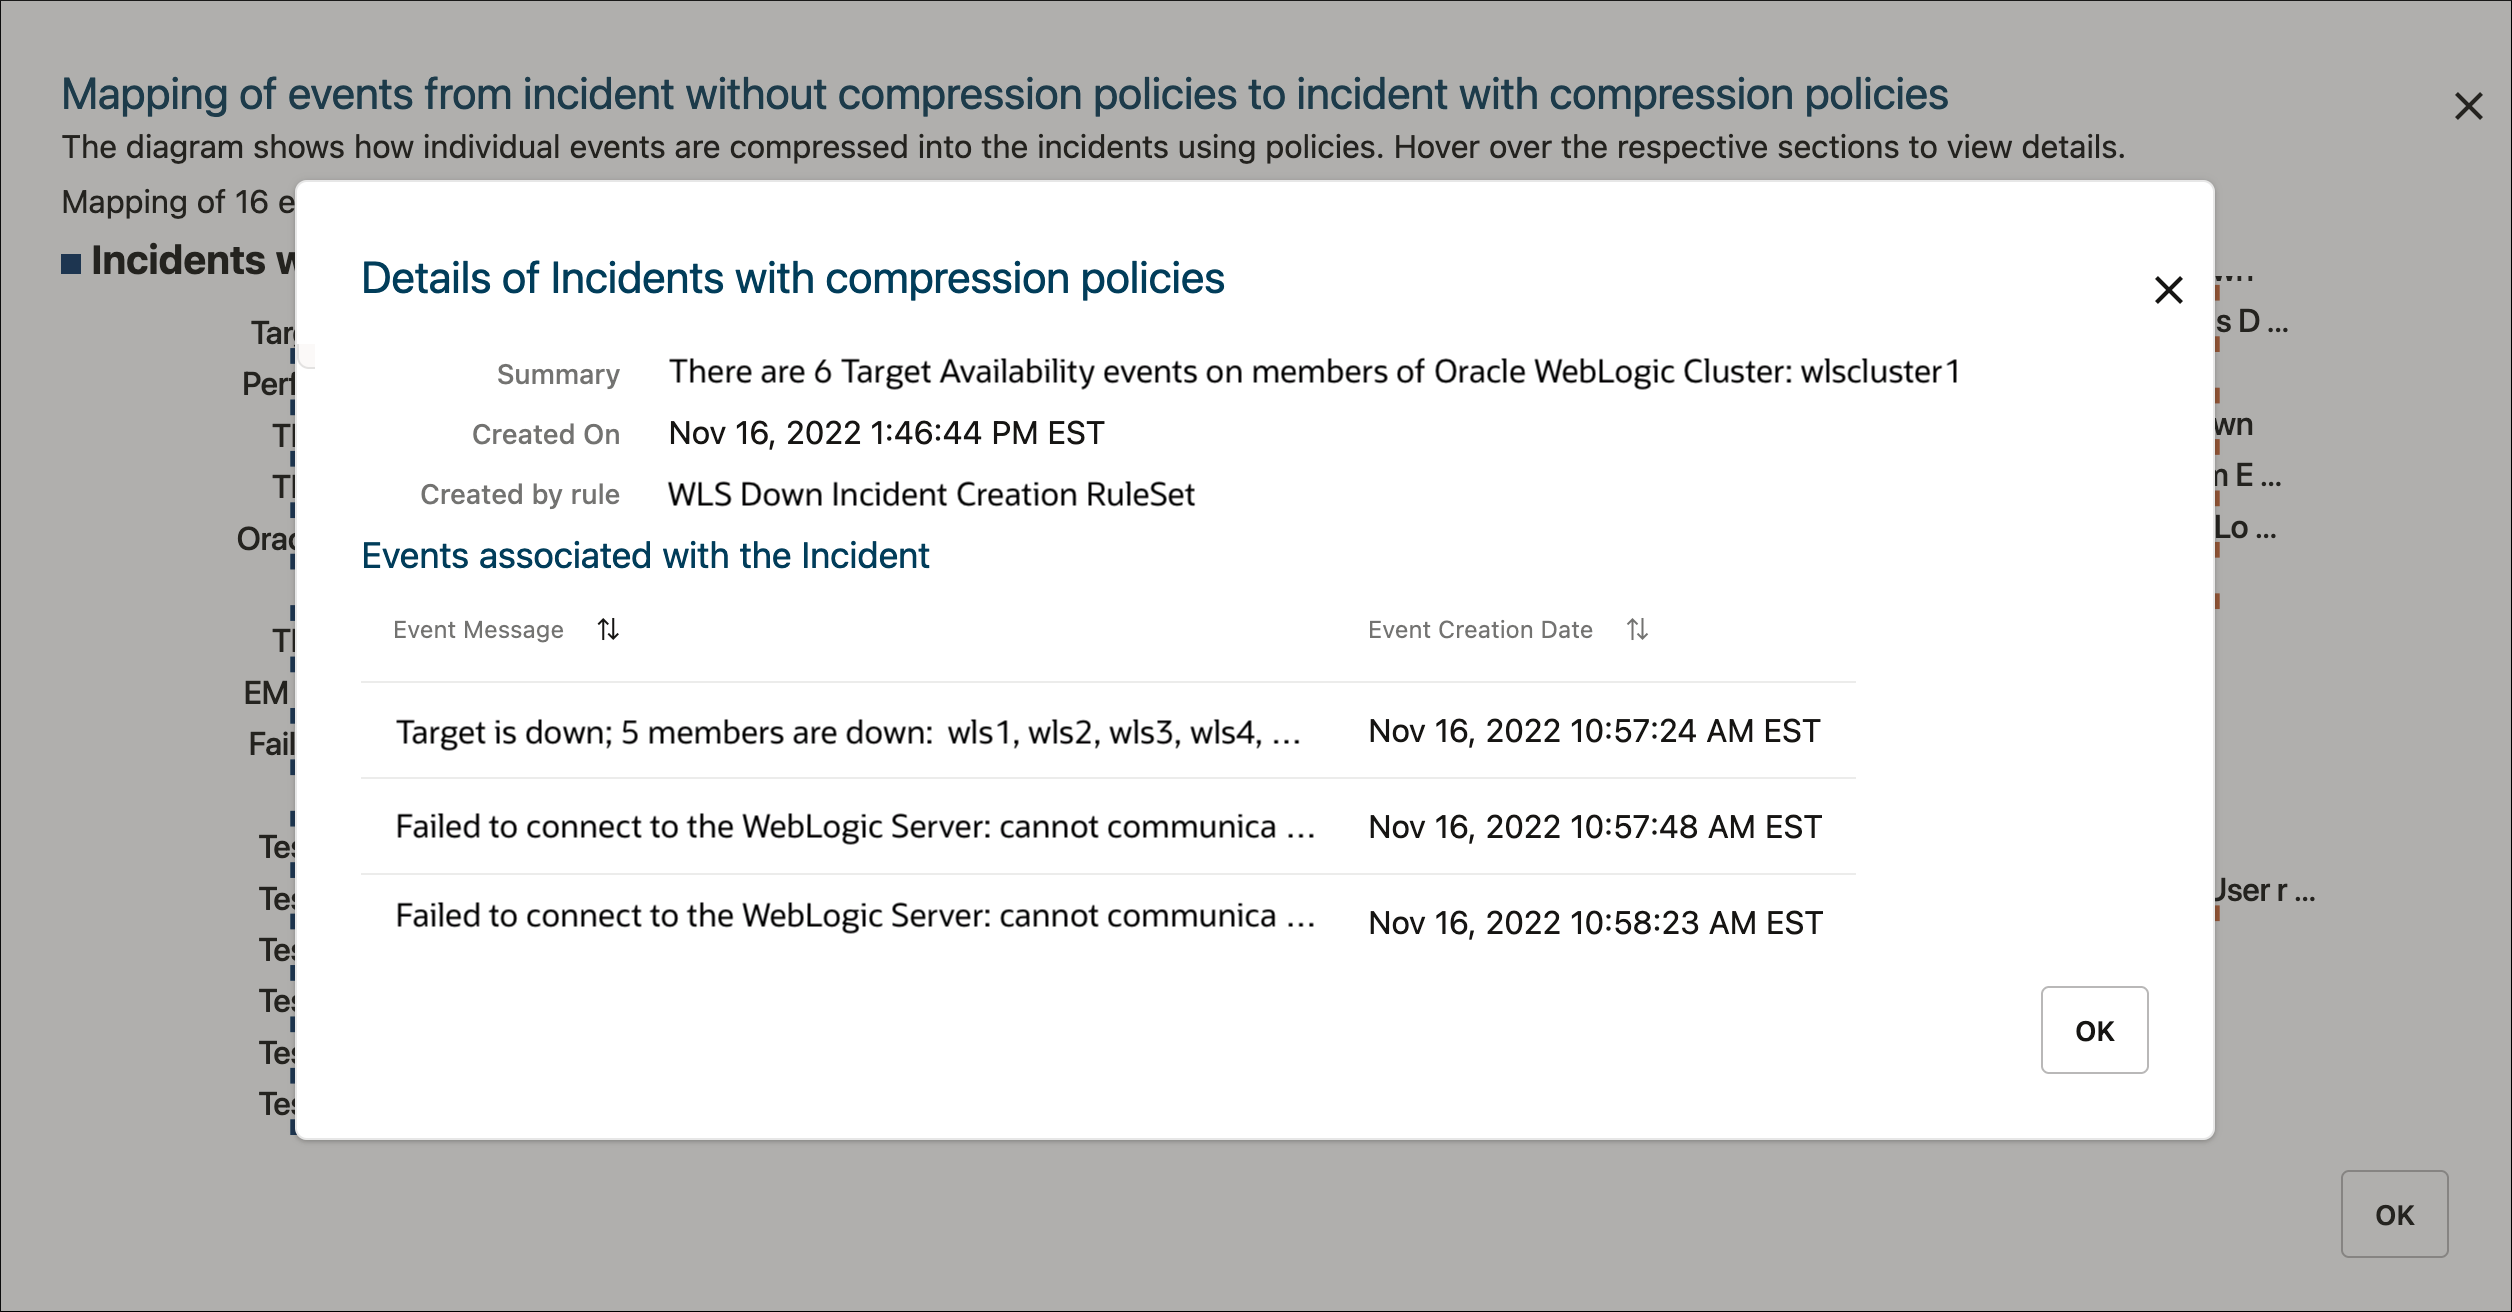 Image shows details for the incident compression